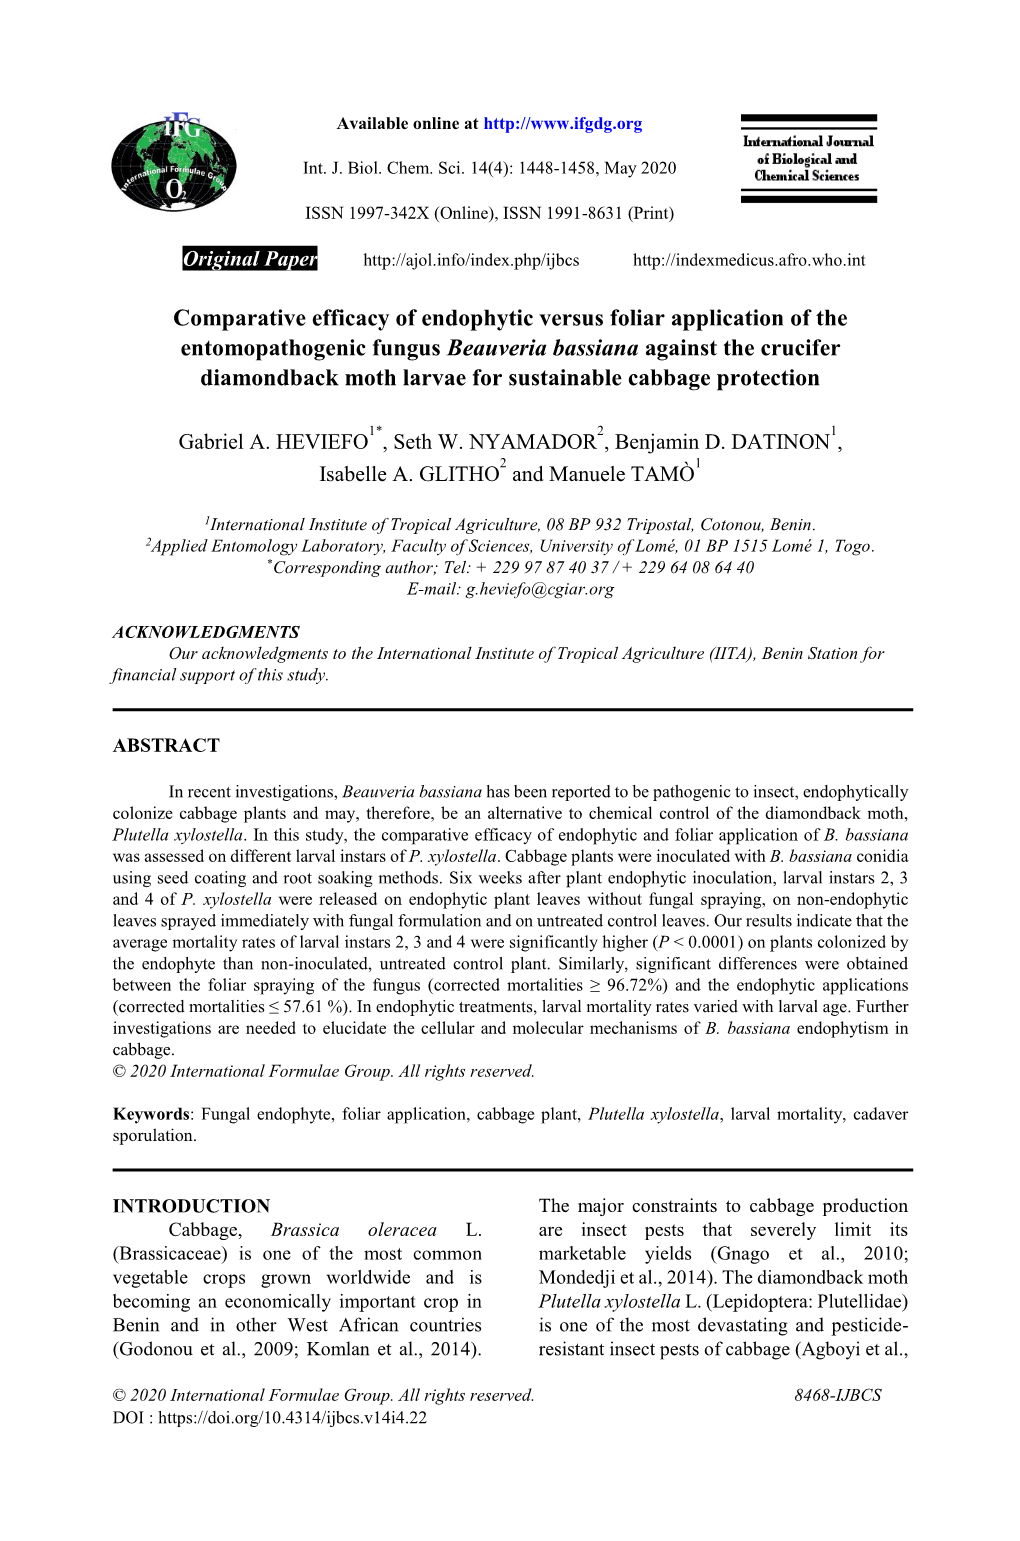 Comparative Efficacy of Endophytic Versus Foliar Application of The